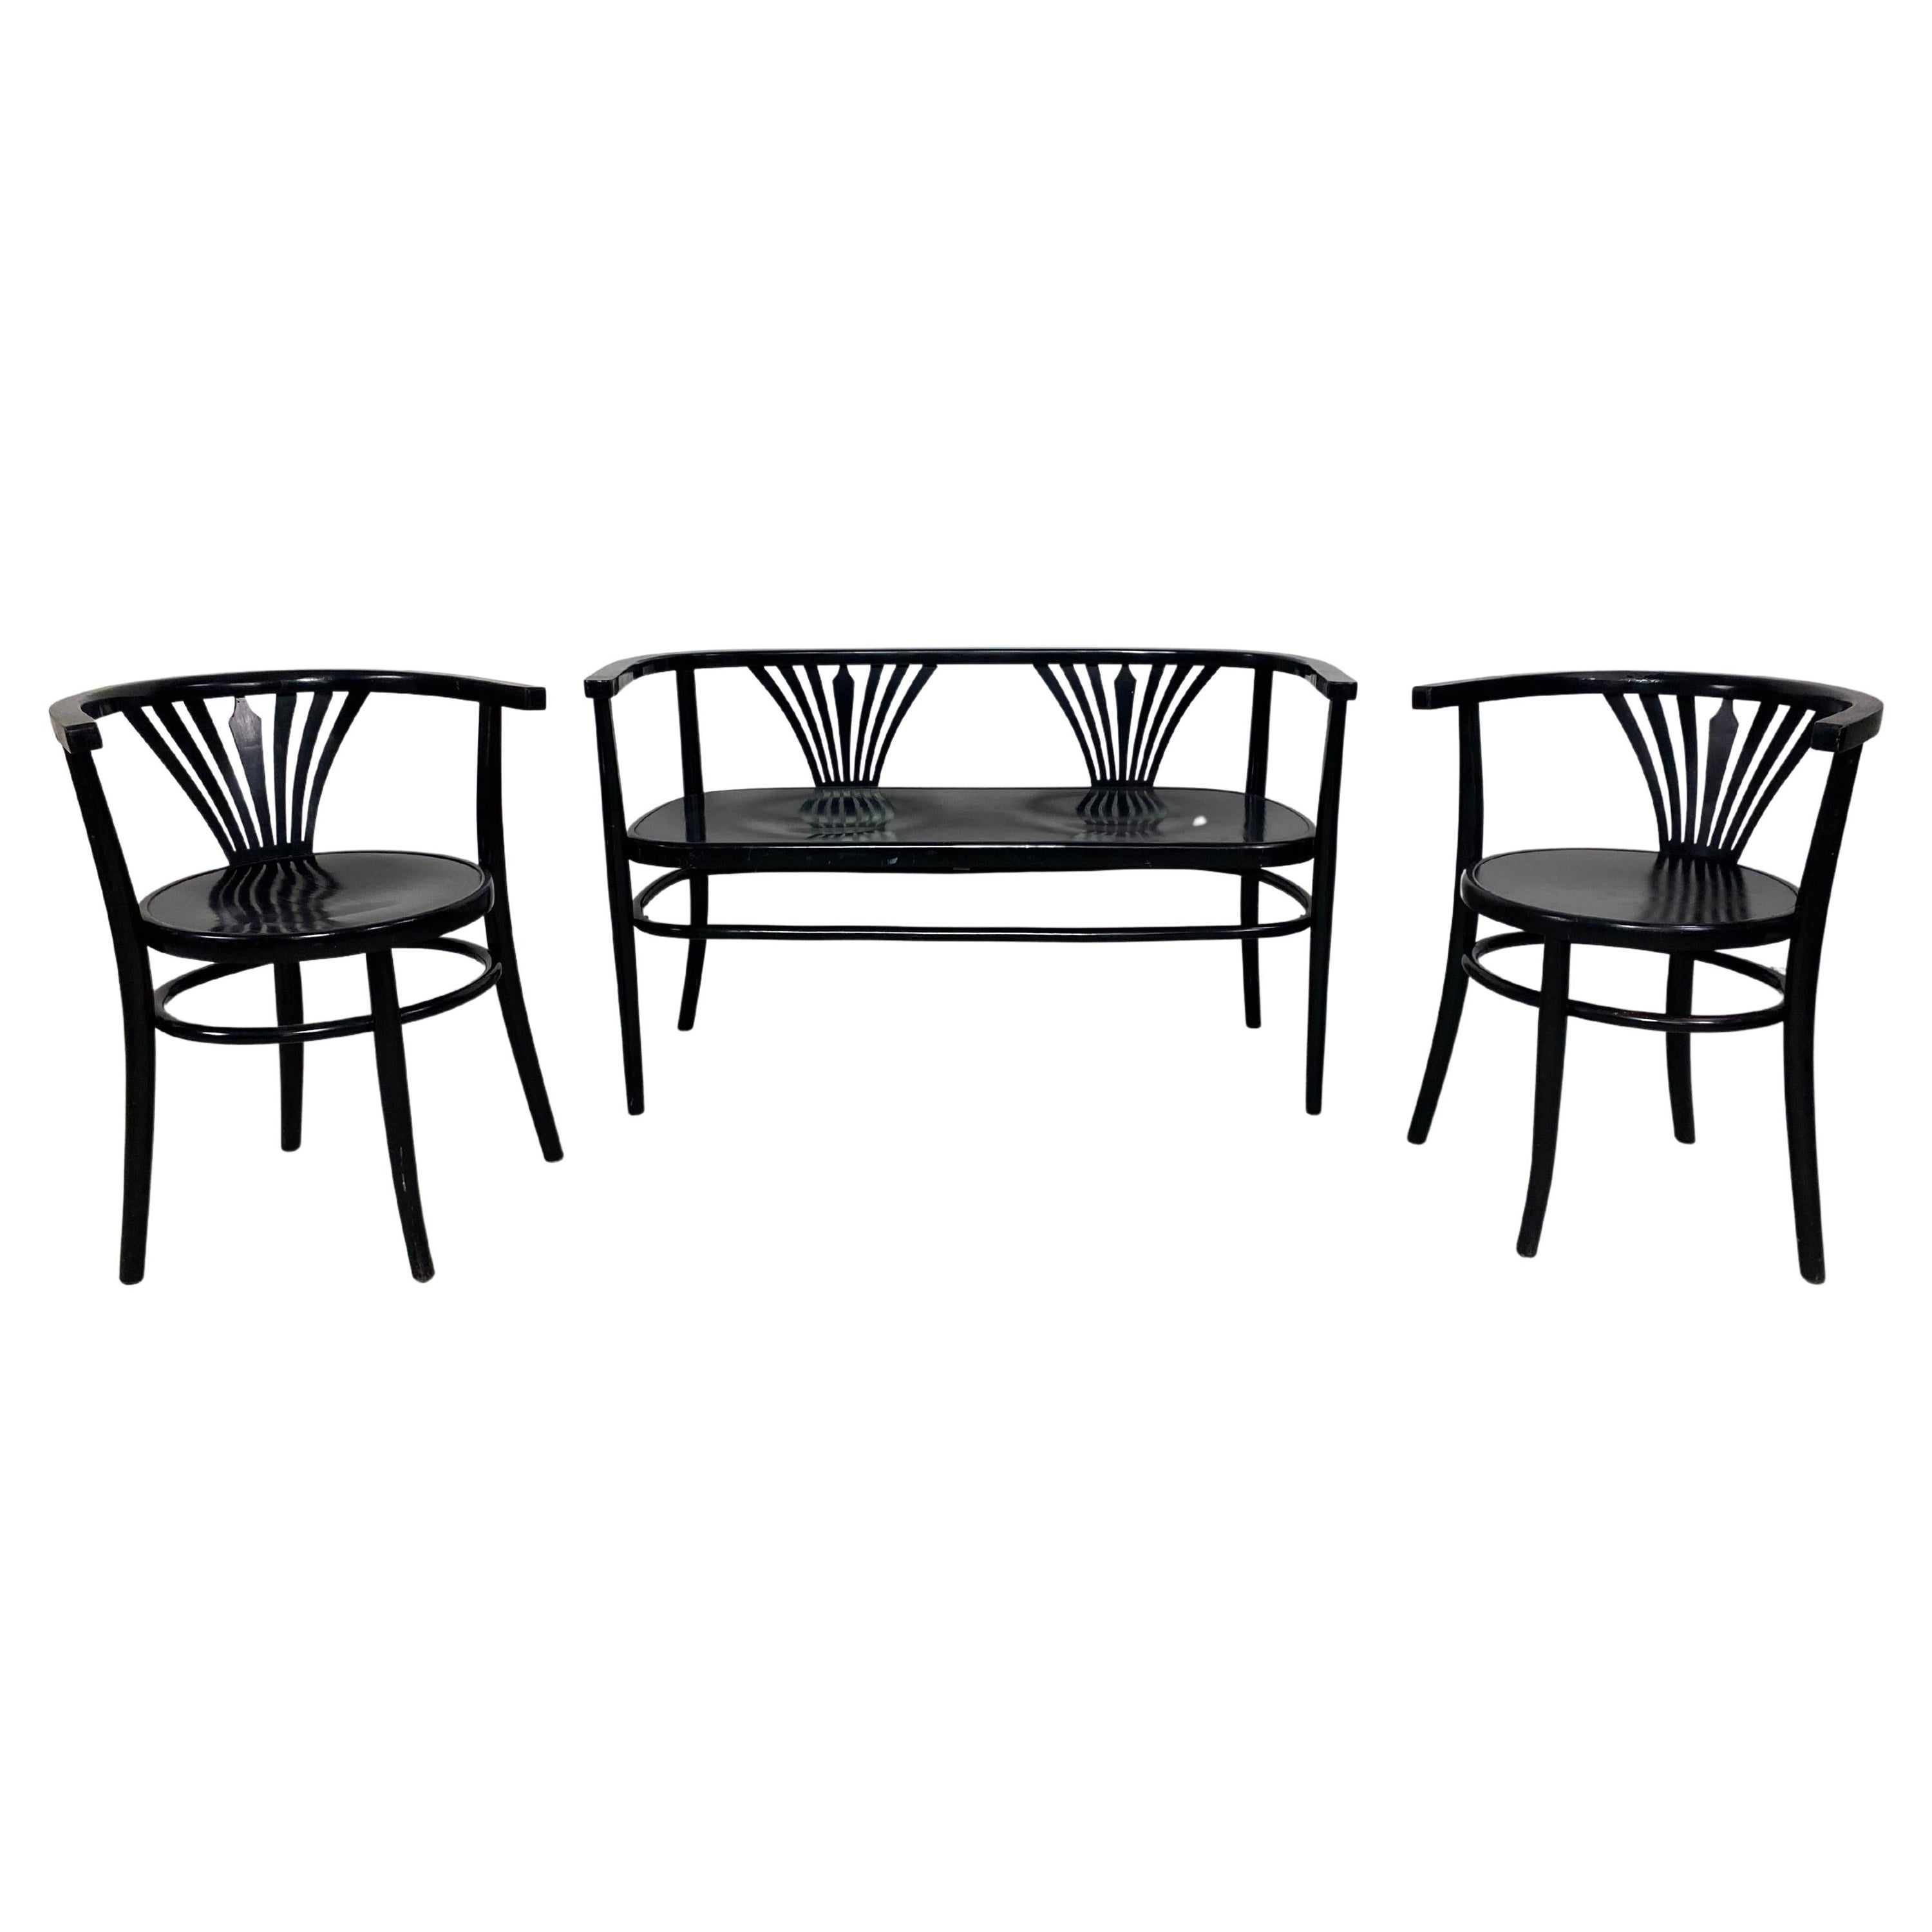 Black secession seating group by Fischel